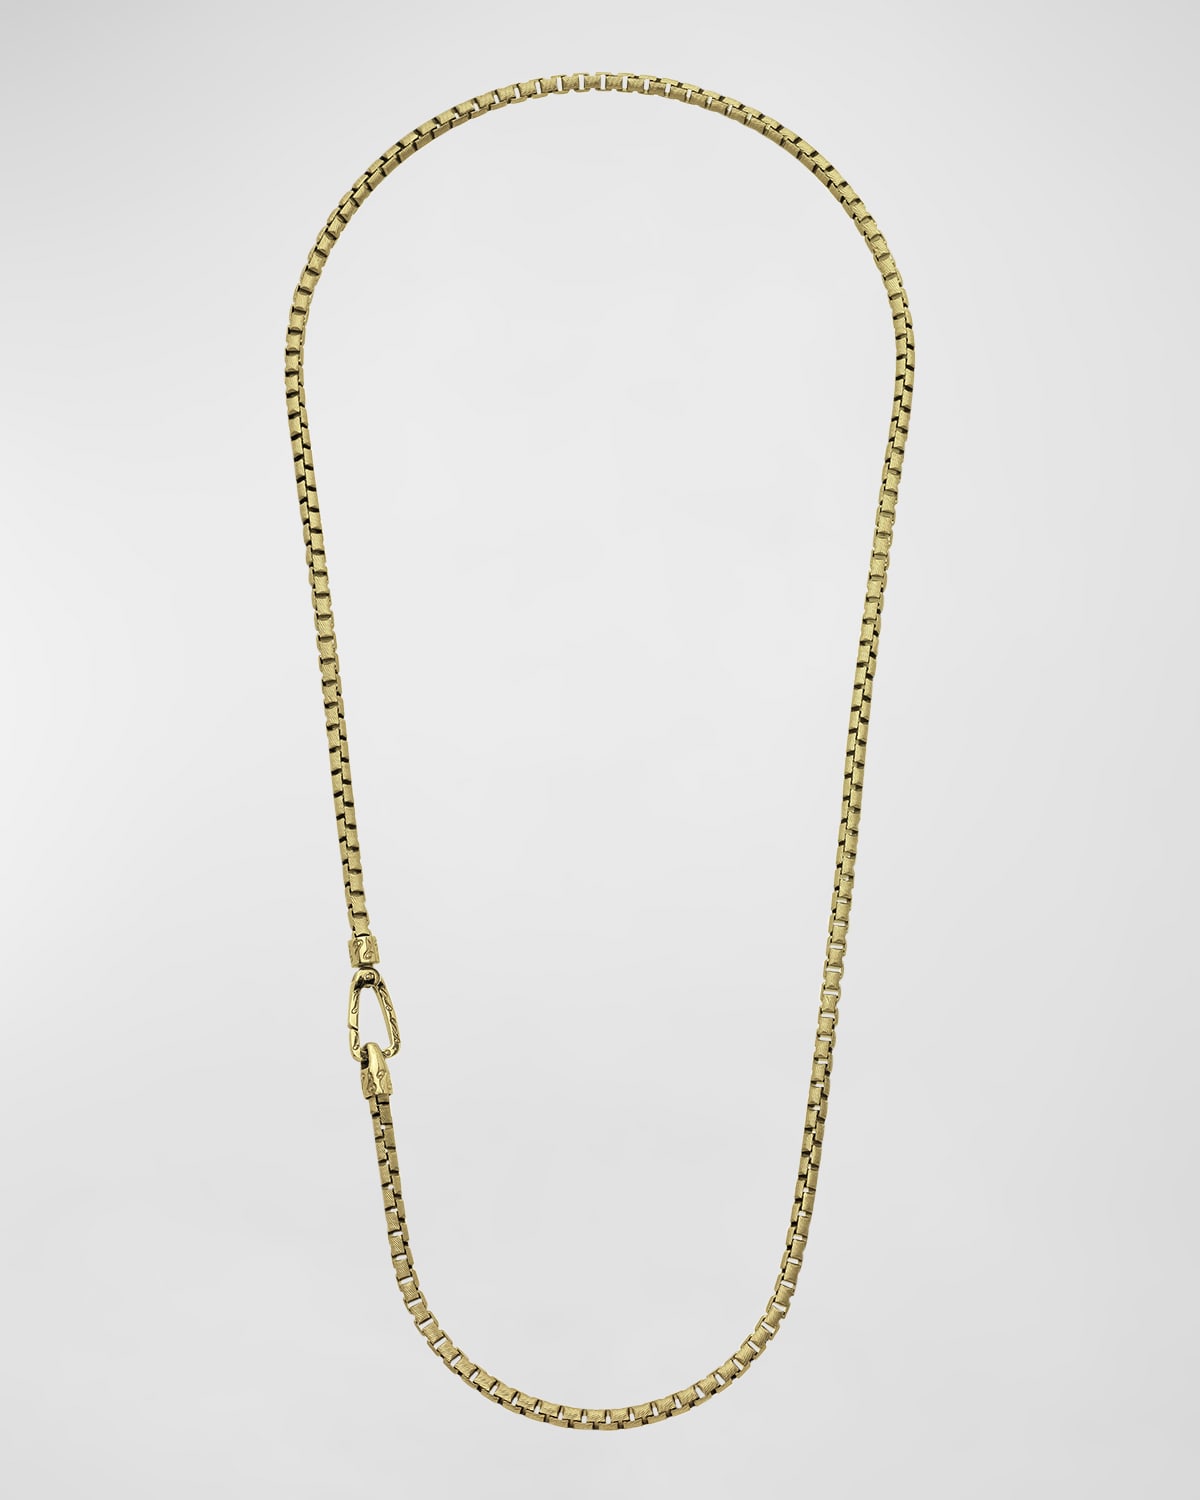 Marco Dal Maso Carved Tubular Yellow Gold Plated Silver Necklace with Matte Chain and Polished Clasp, 20"L